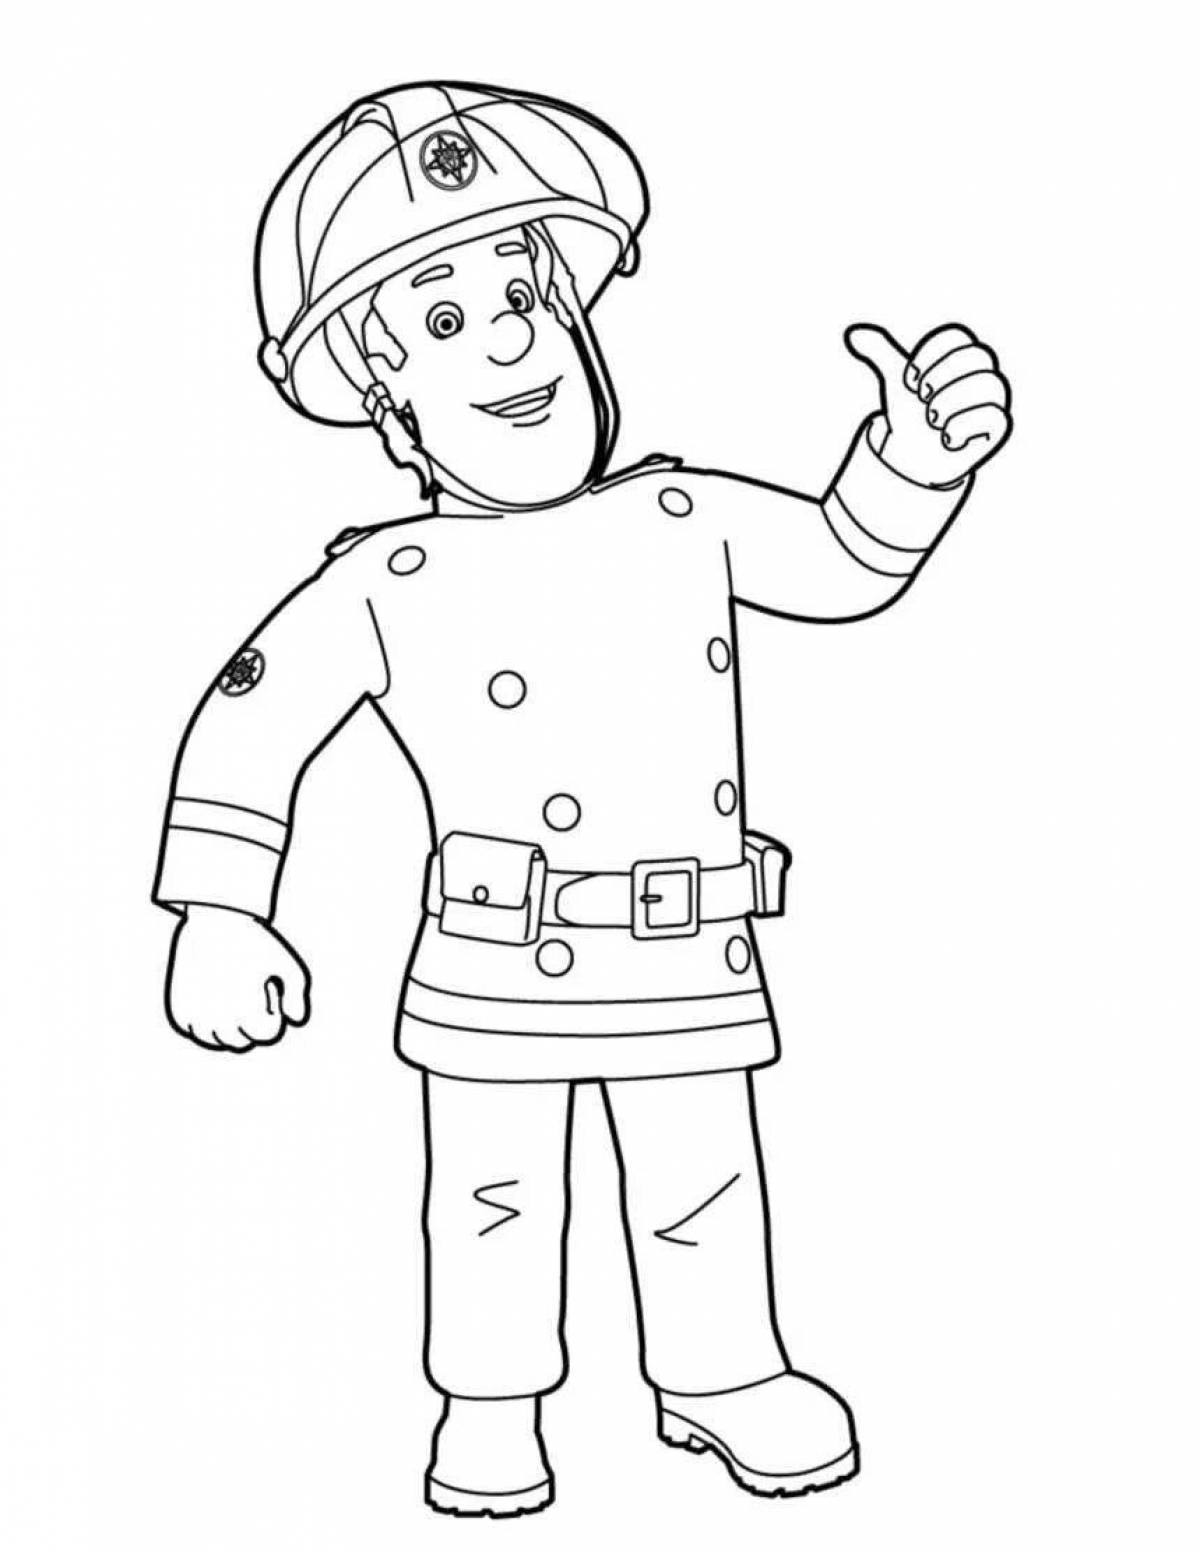 Firefighter dynamic coloring book for kids